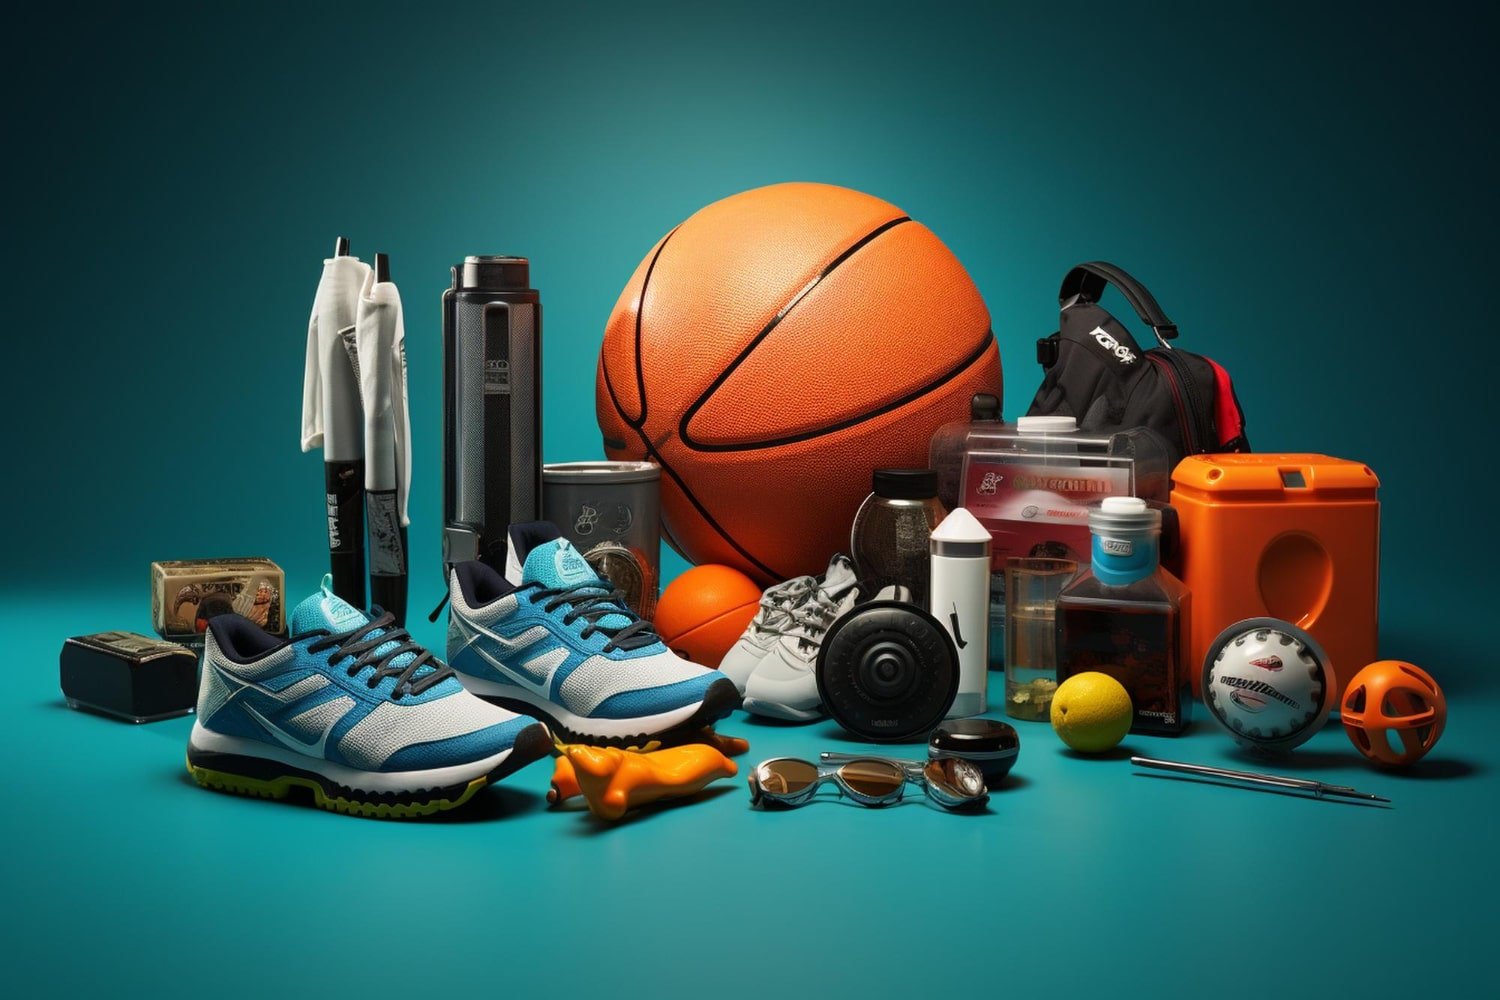 Equip Yourself For Any Sport With INTERSPORT Australia’s Comprehensive Sporting Goods